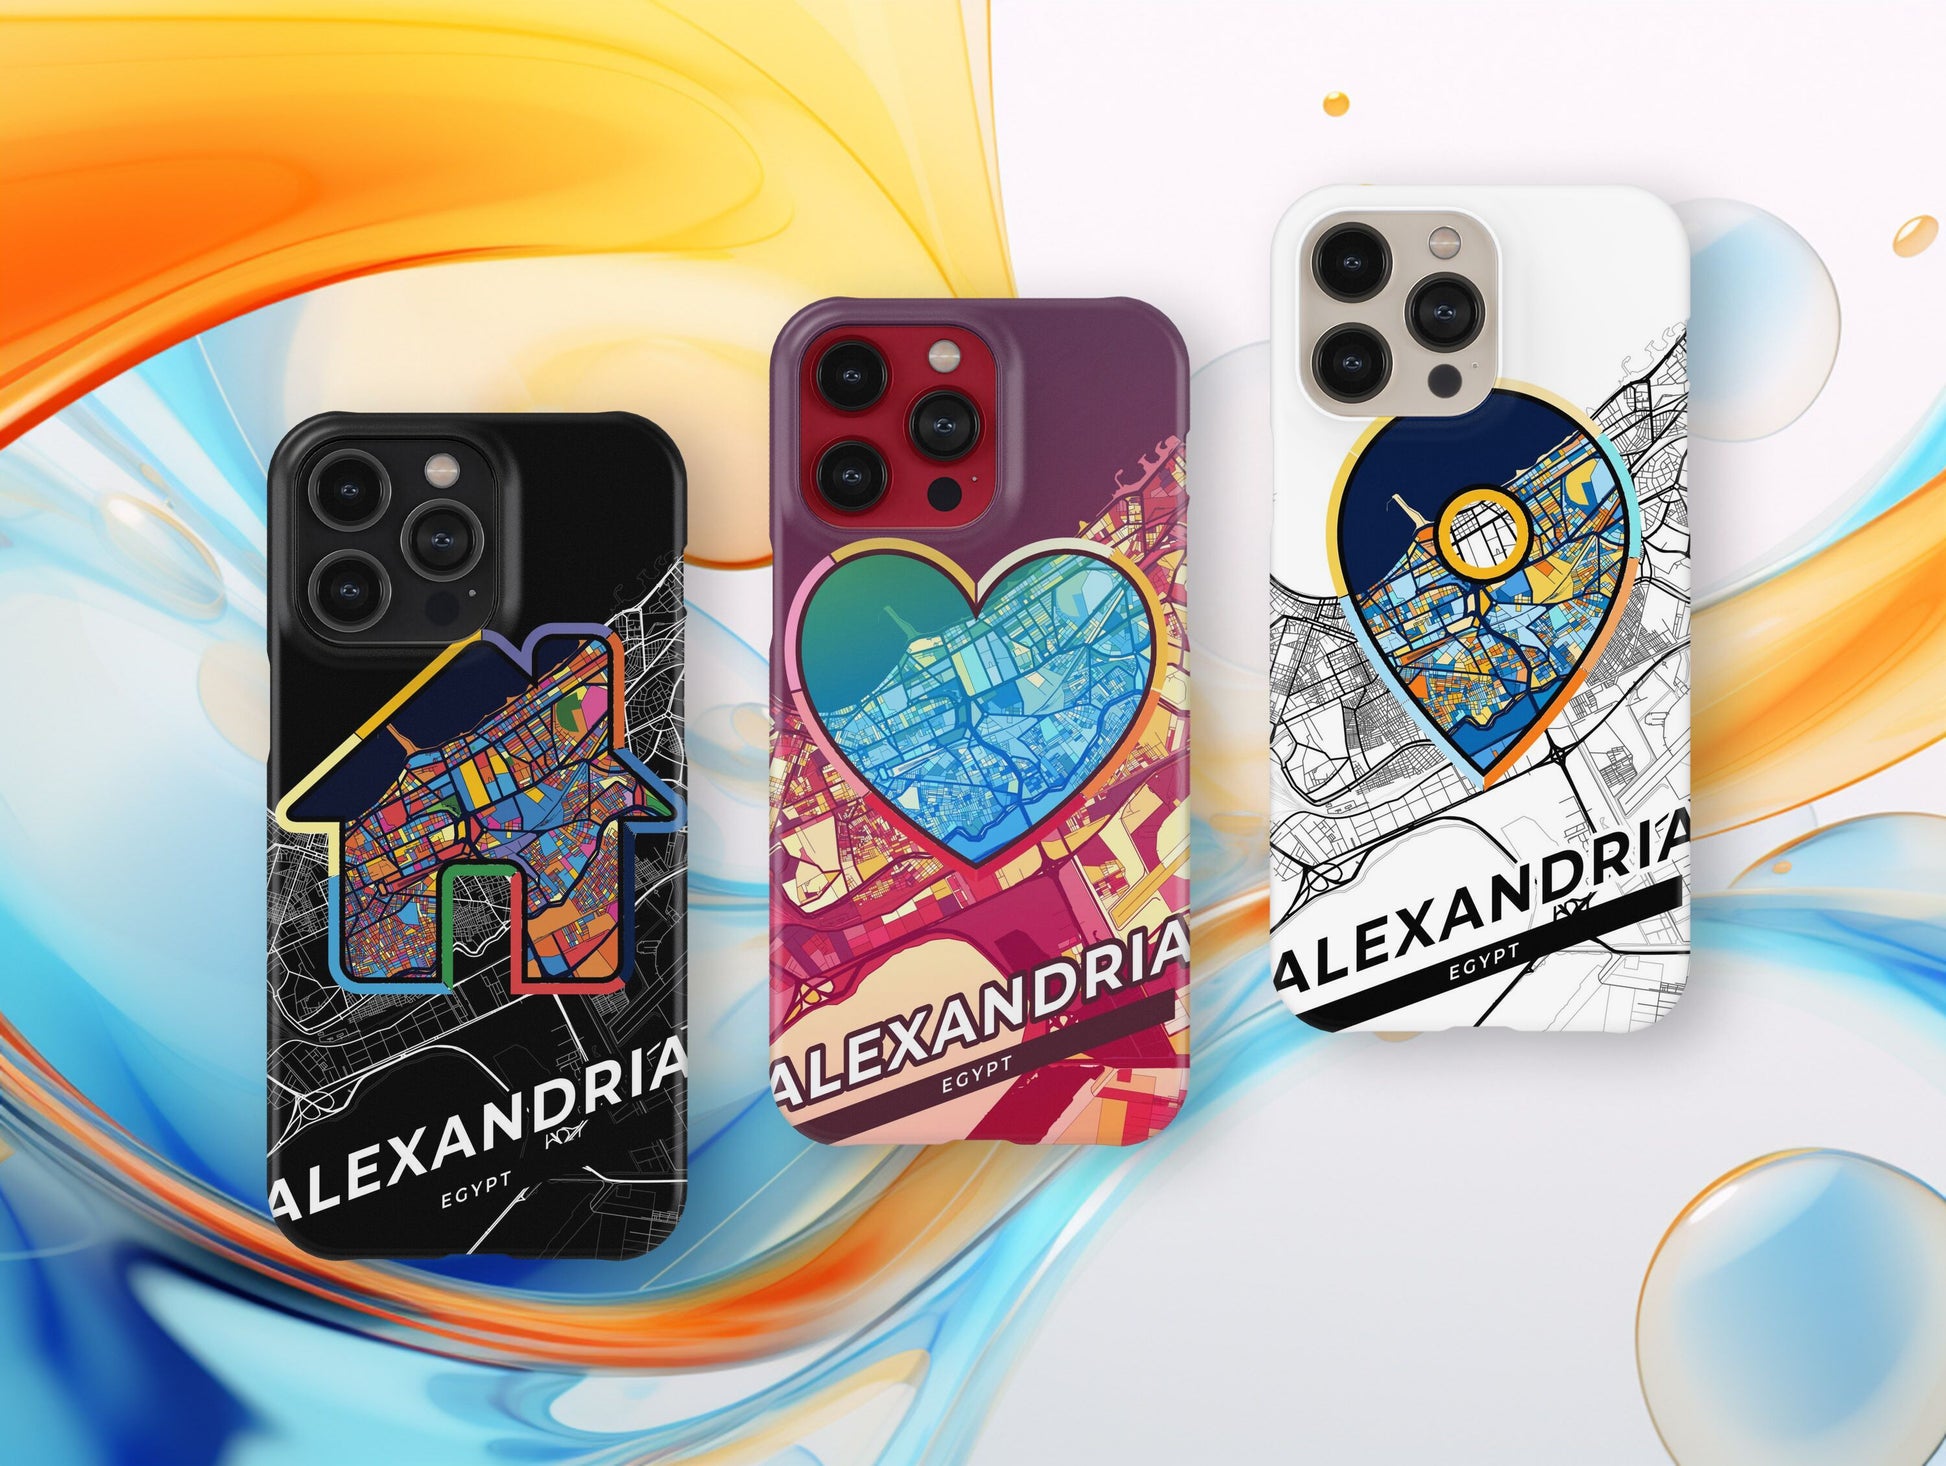 Alexandria Egypt slim phone case with colorful icon. Birthday, wedding or housewarming gift. Couple match cases.